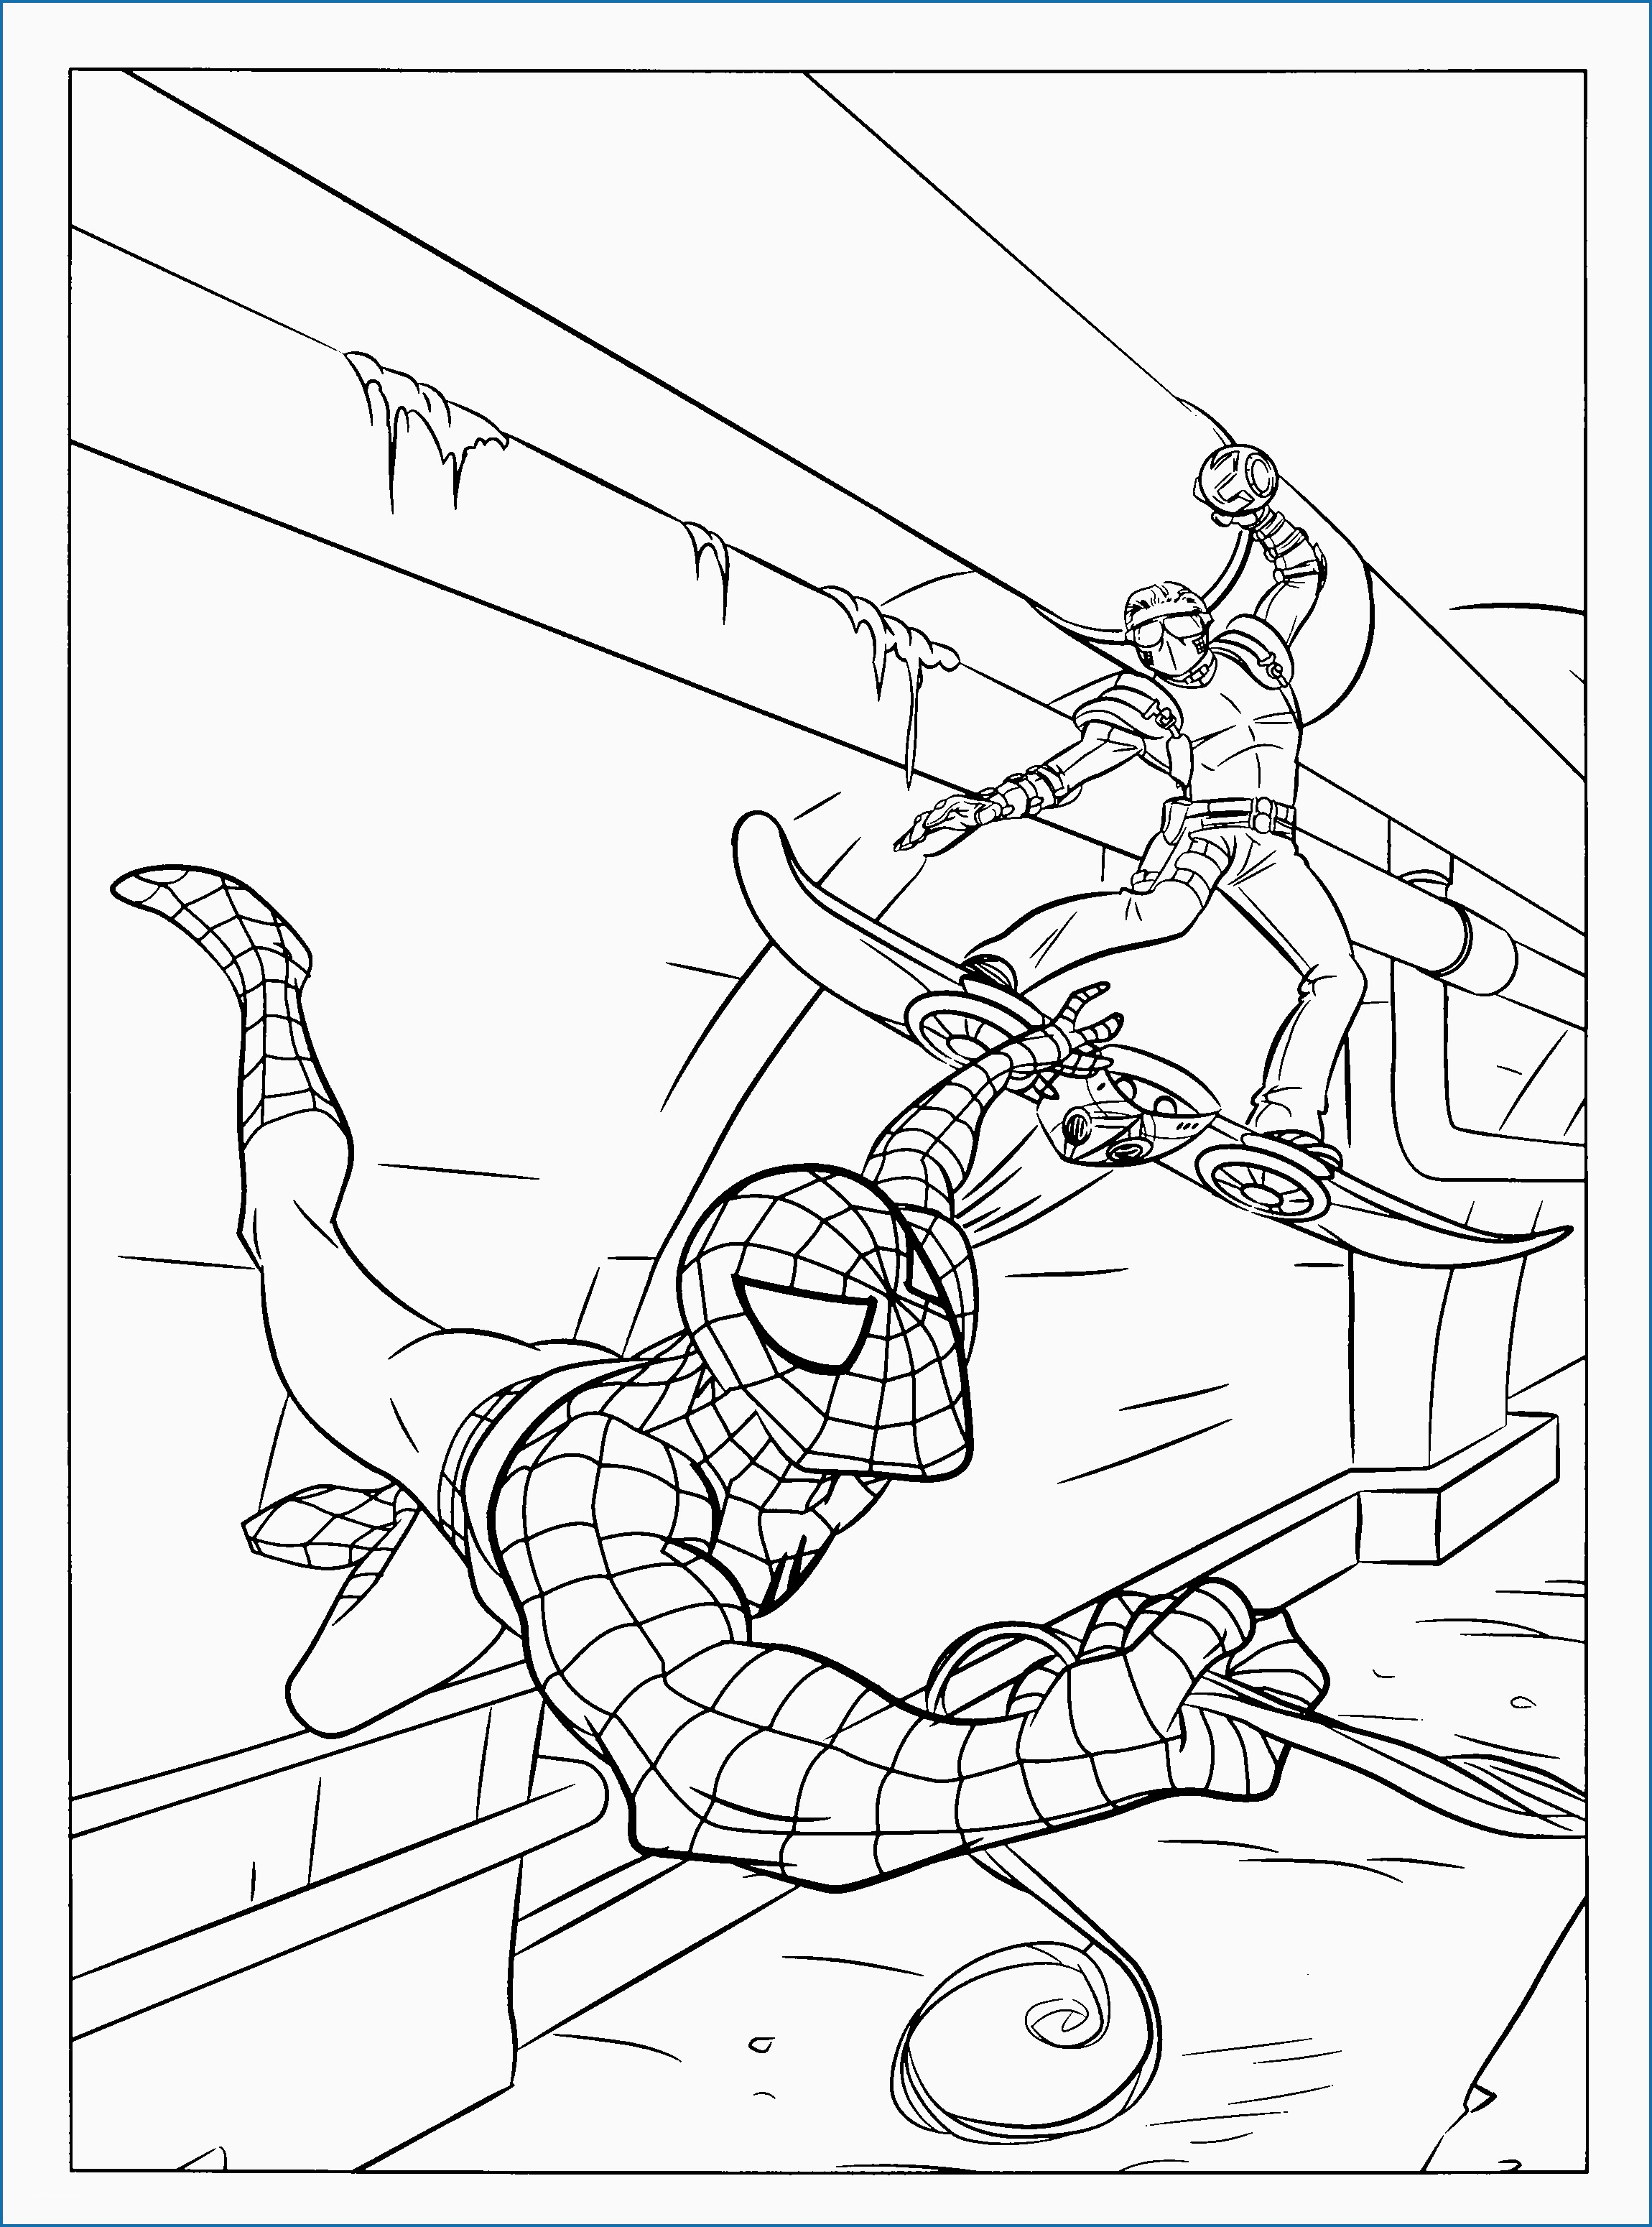 Free Printable Spiderman Coloring Pages Coloring Book Ideas 42 Fabulous Free Printable Spiderman Coloring